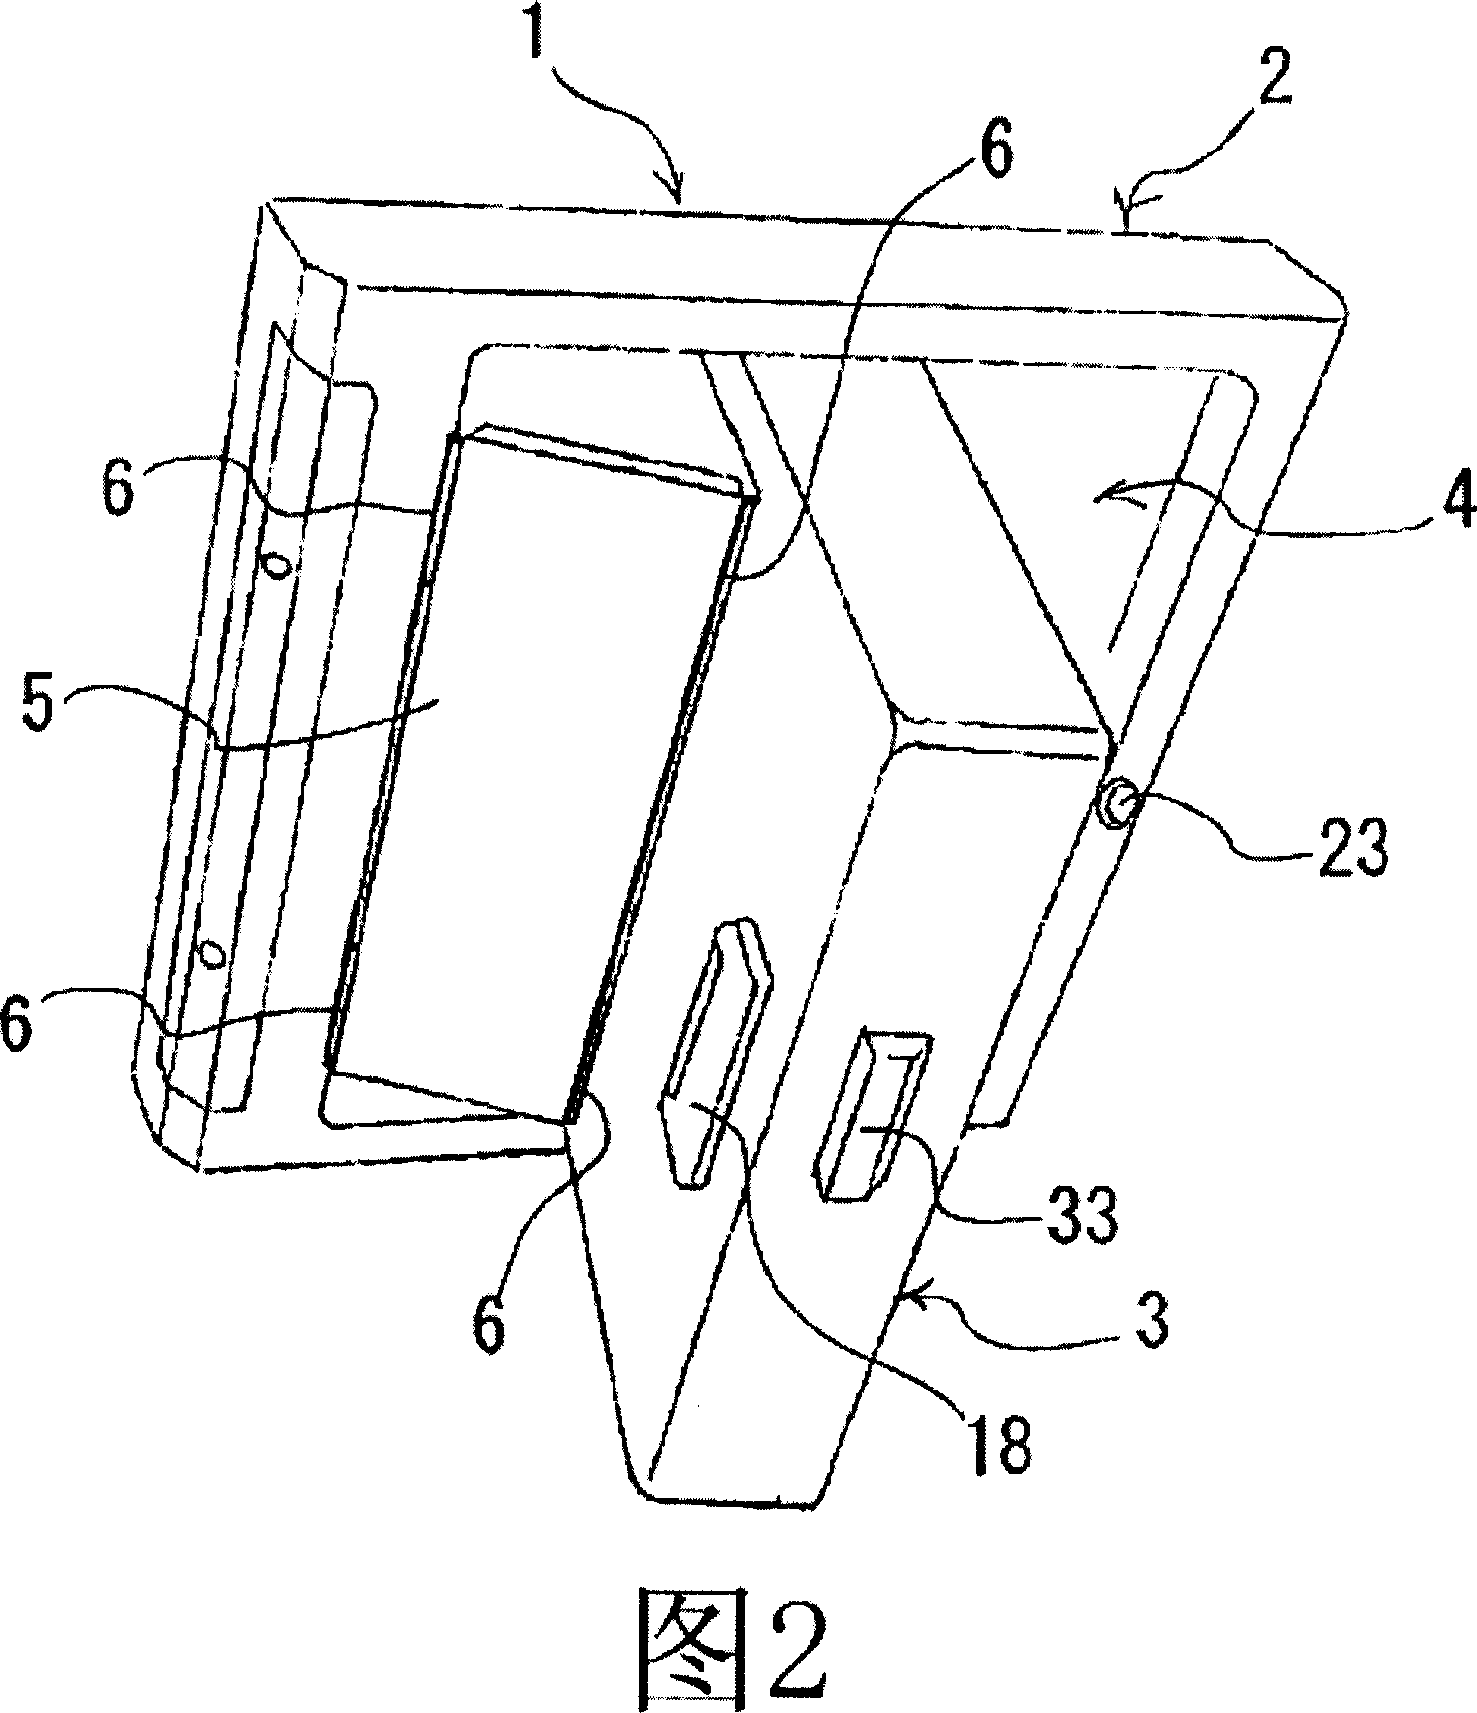 Vehicle boarded monitor storage device